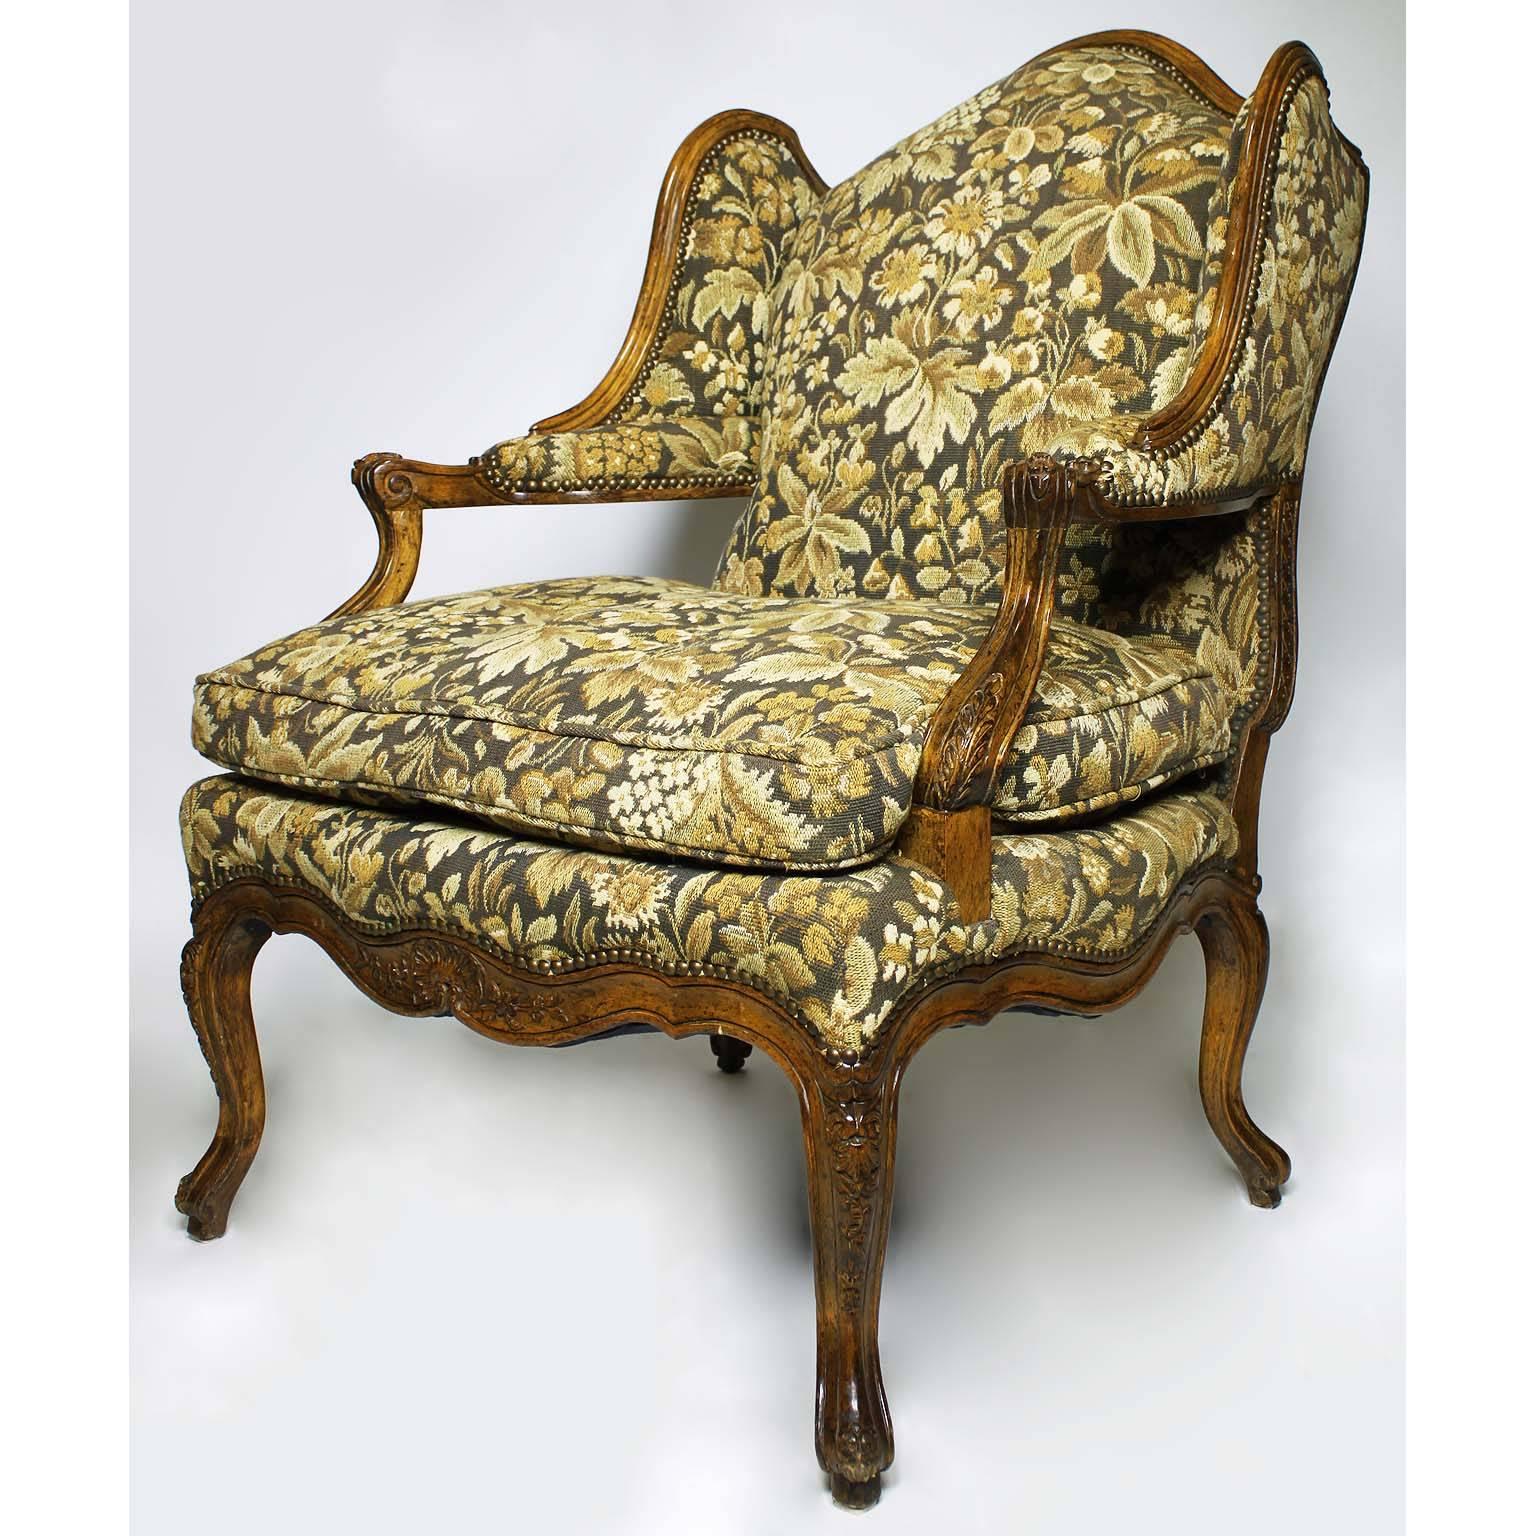 A fine pair of French Louis XV style carved walnut wingback fauteuil armchairs. The finely carved winged walnut frames upholstered in a verdure floral fabric with a cushion seat and upholstered elbow armrests, circa mid-20th century.

Measures: